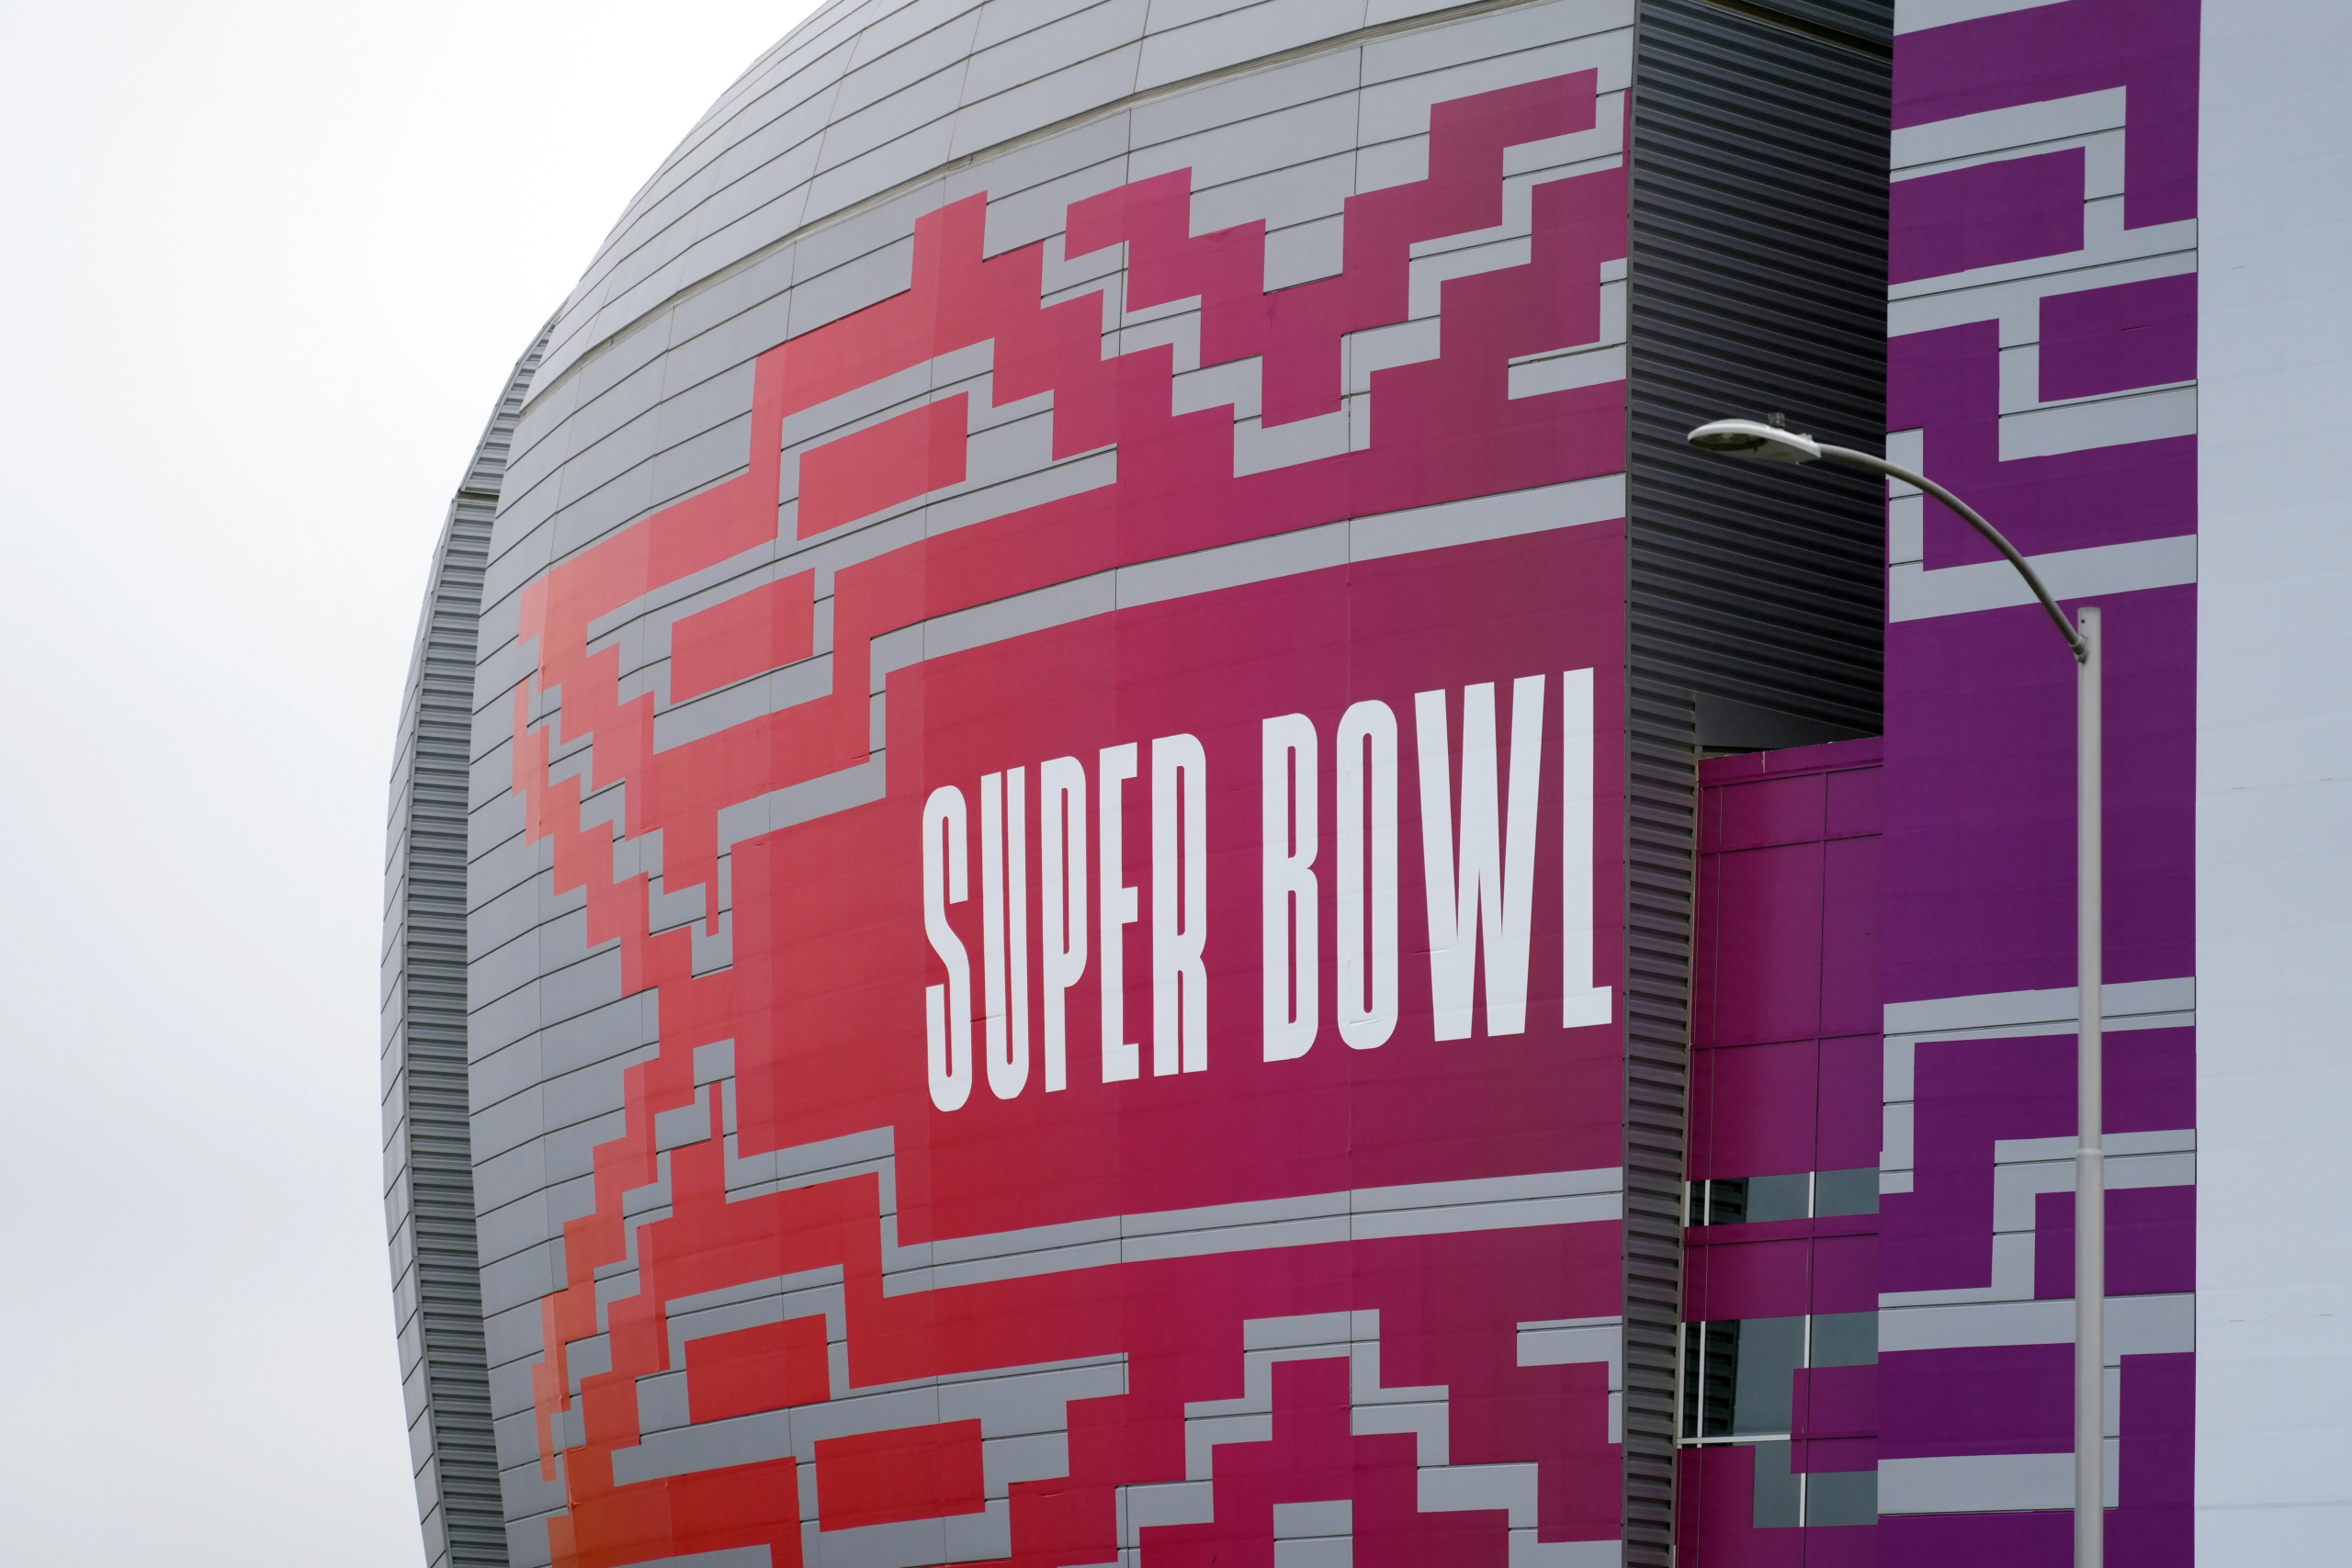 Super Bowl ticket prices skyrocket, pricing many Bengals fans out